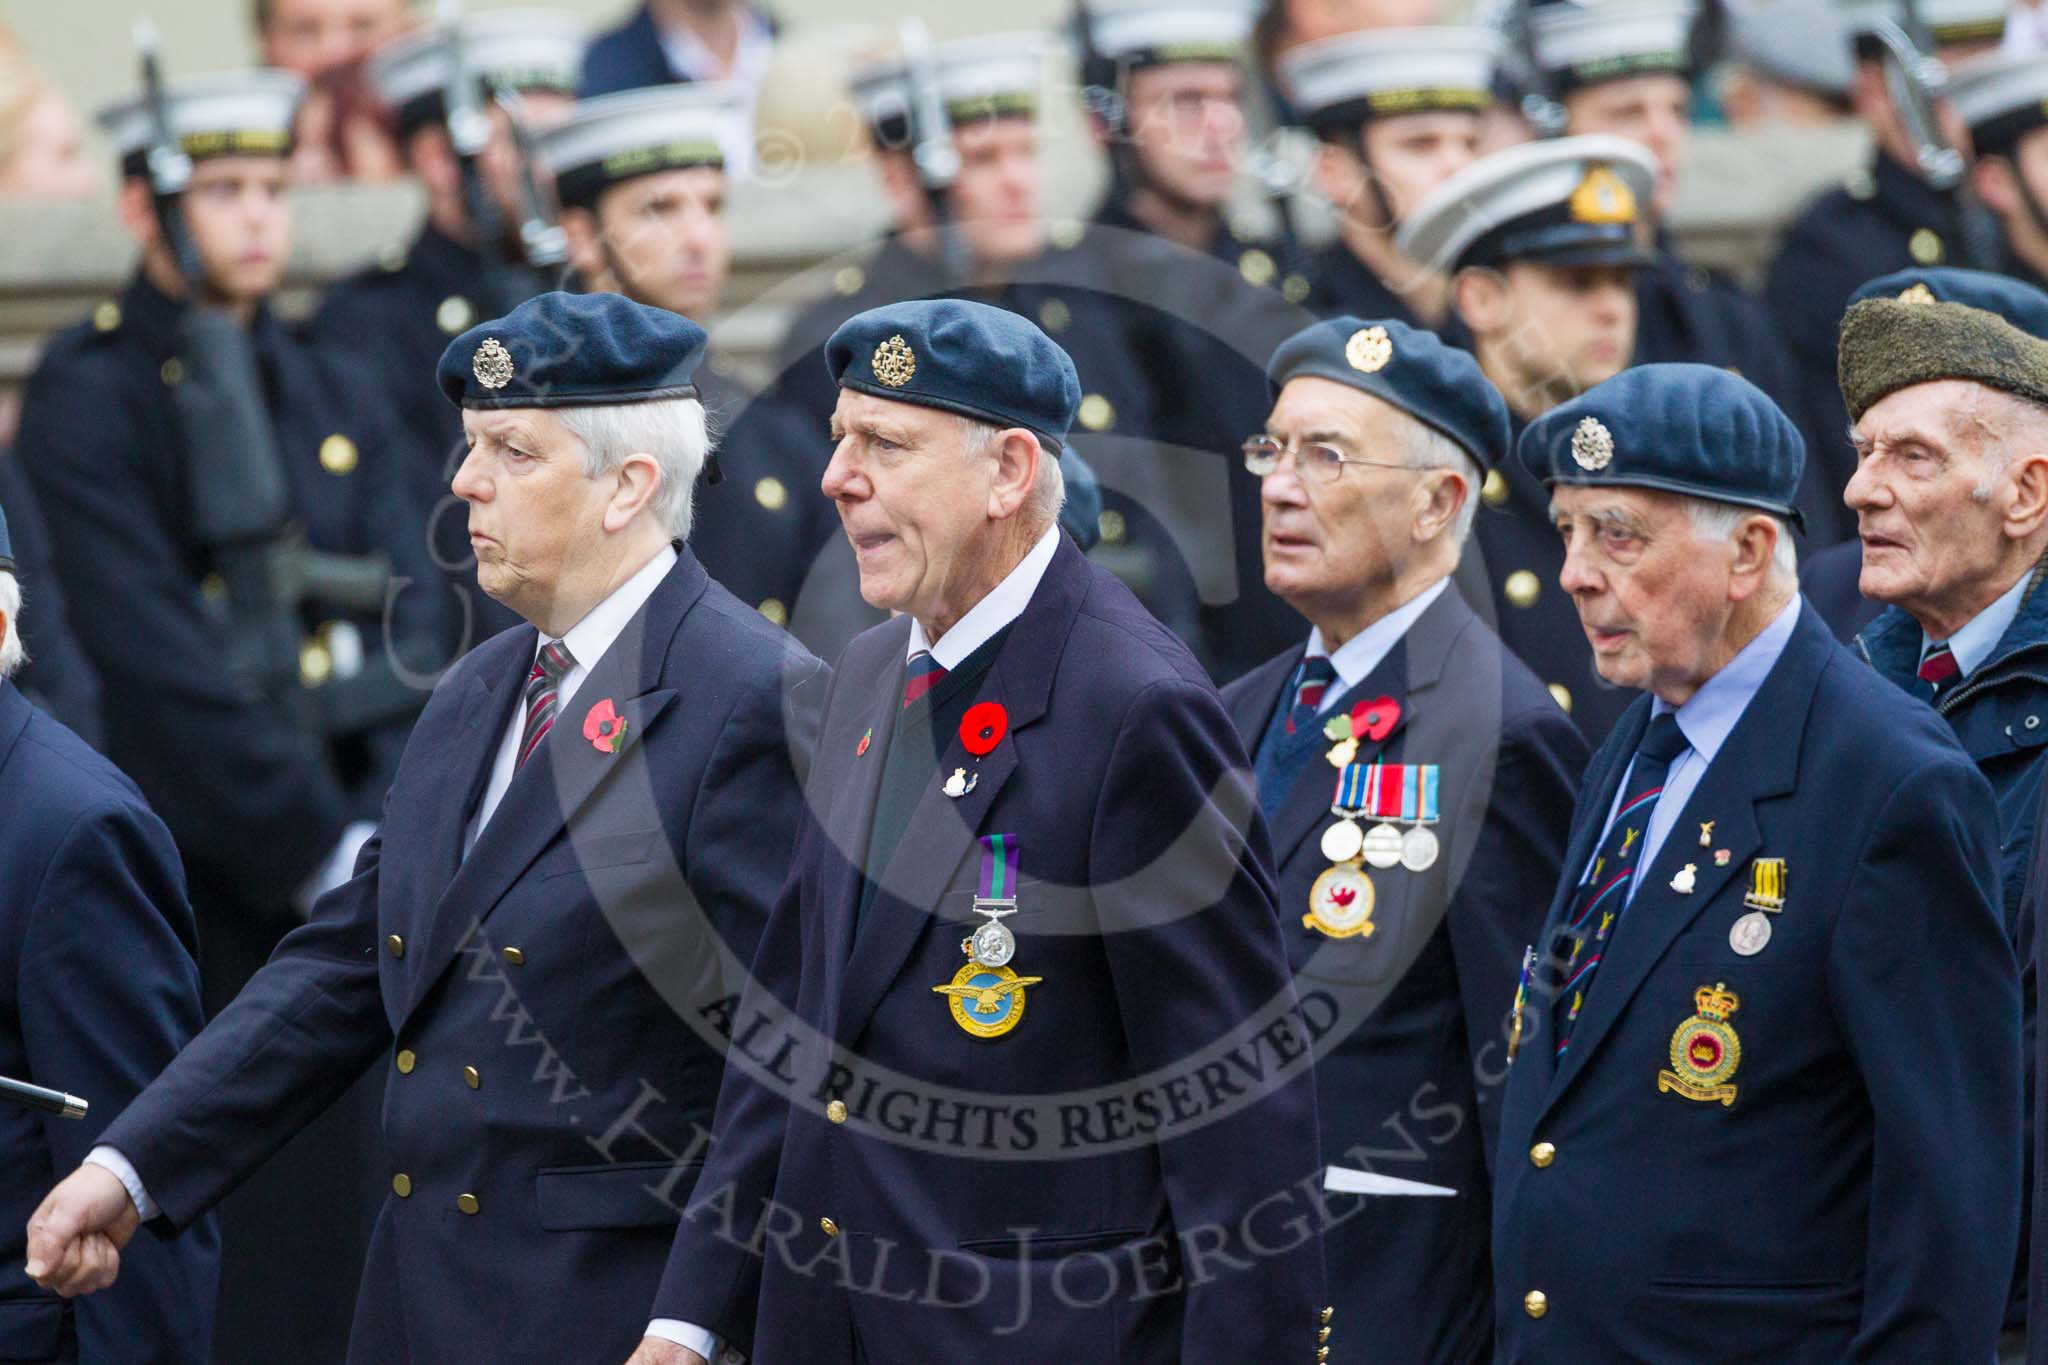 Remembrance Sunday at the Cenotaph 2015: Group C5, National Service (Royal Air Force) Association.
Cenotaph, Whitehall, London SW1,
London,
Greater London,
United Kingdom,
on 08 November 2015 at 11:48, image #457